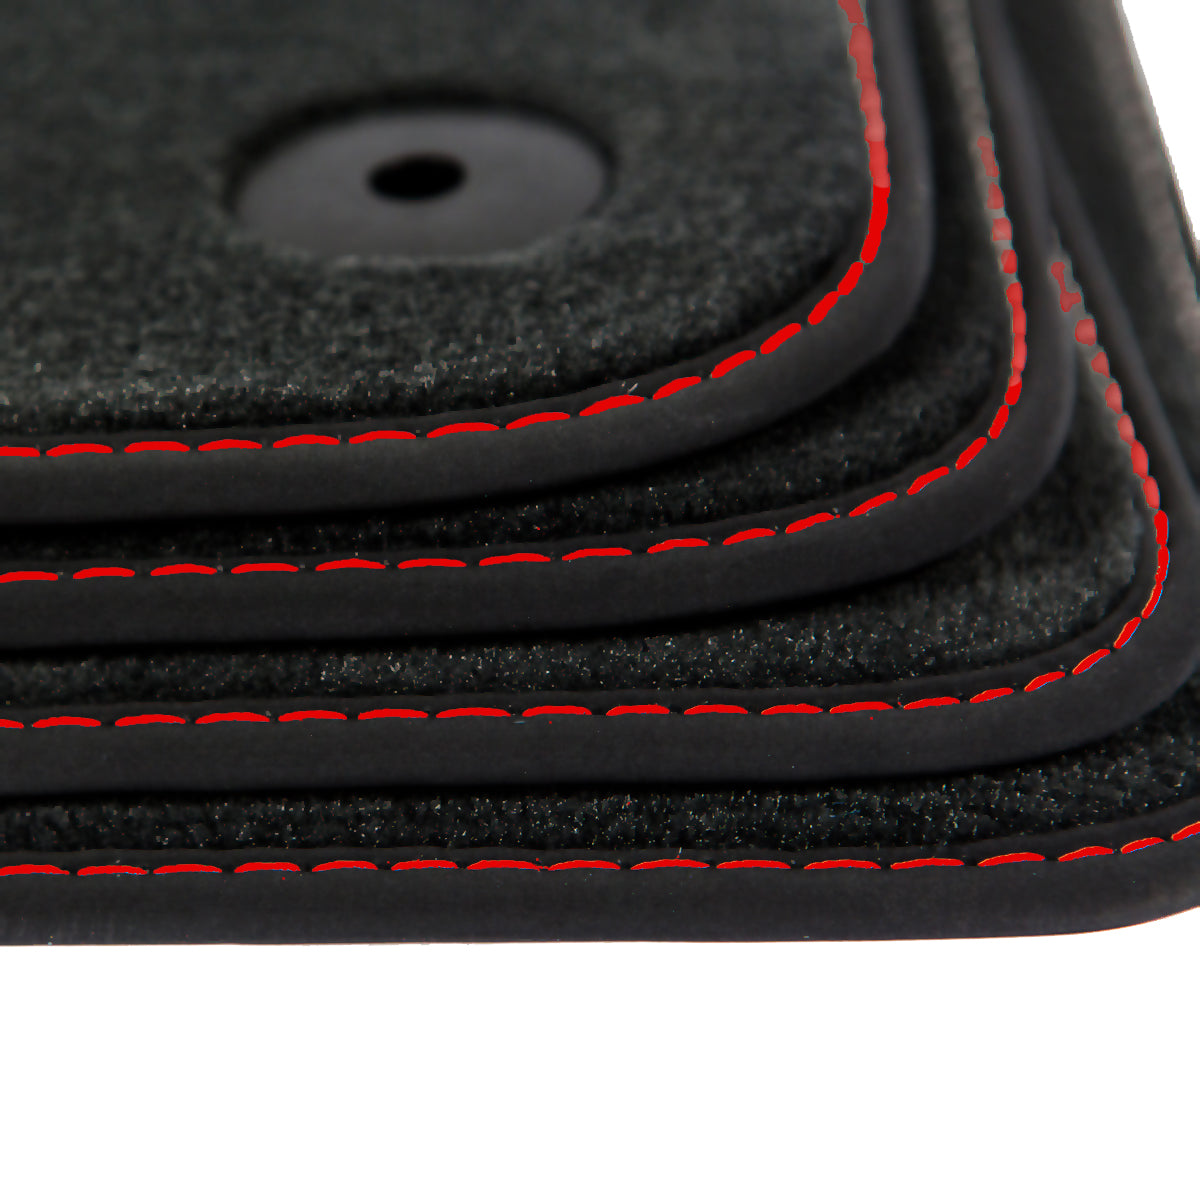 Audi A5 & S5 Floor Mats - Convertible & Coupe 8F7, 8T3 - Red Stitching